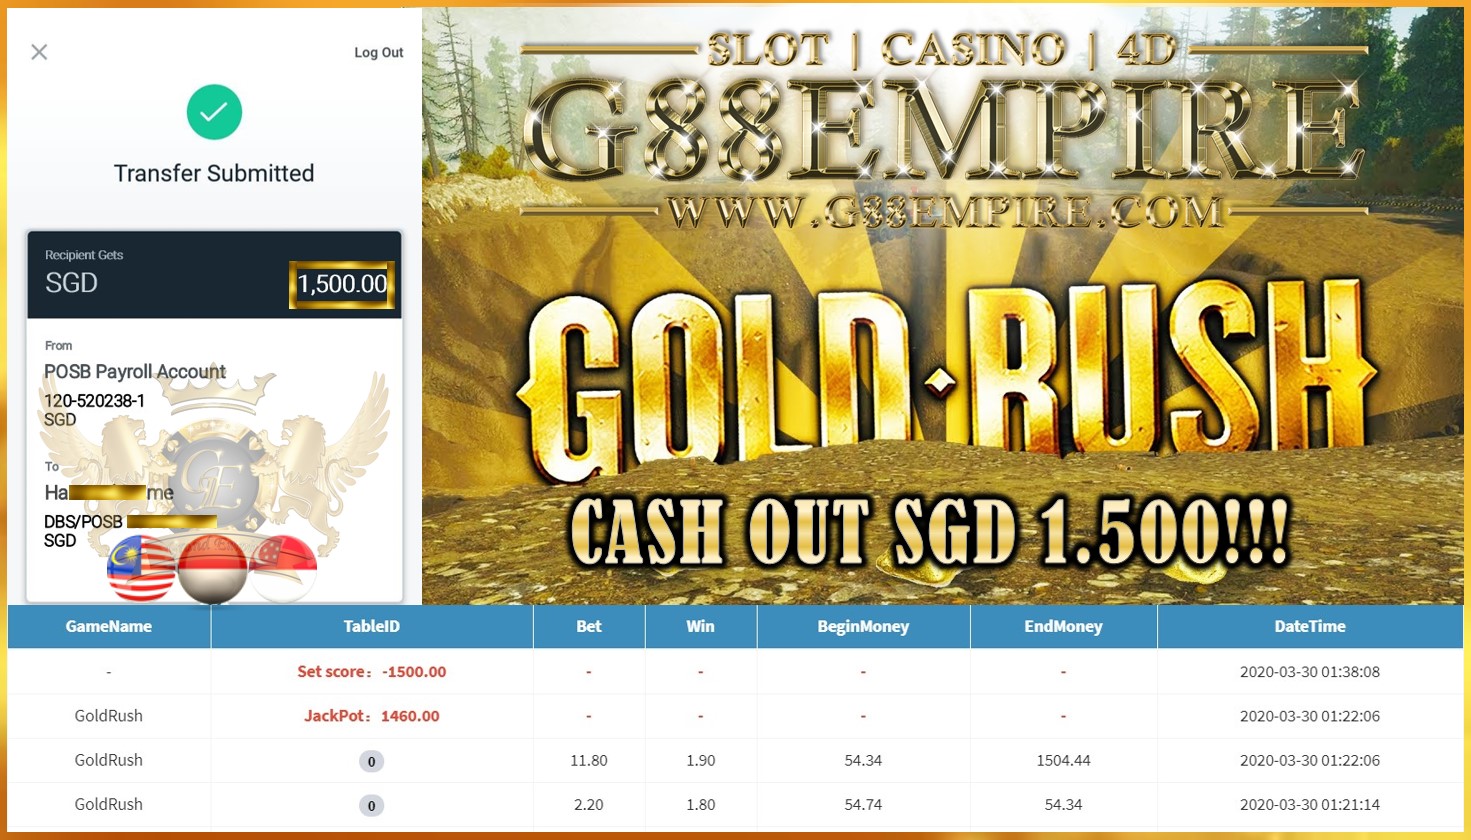 GOLD RUSH CASH OUT 1.500!!!